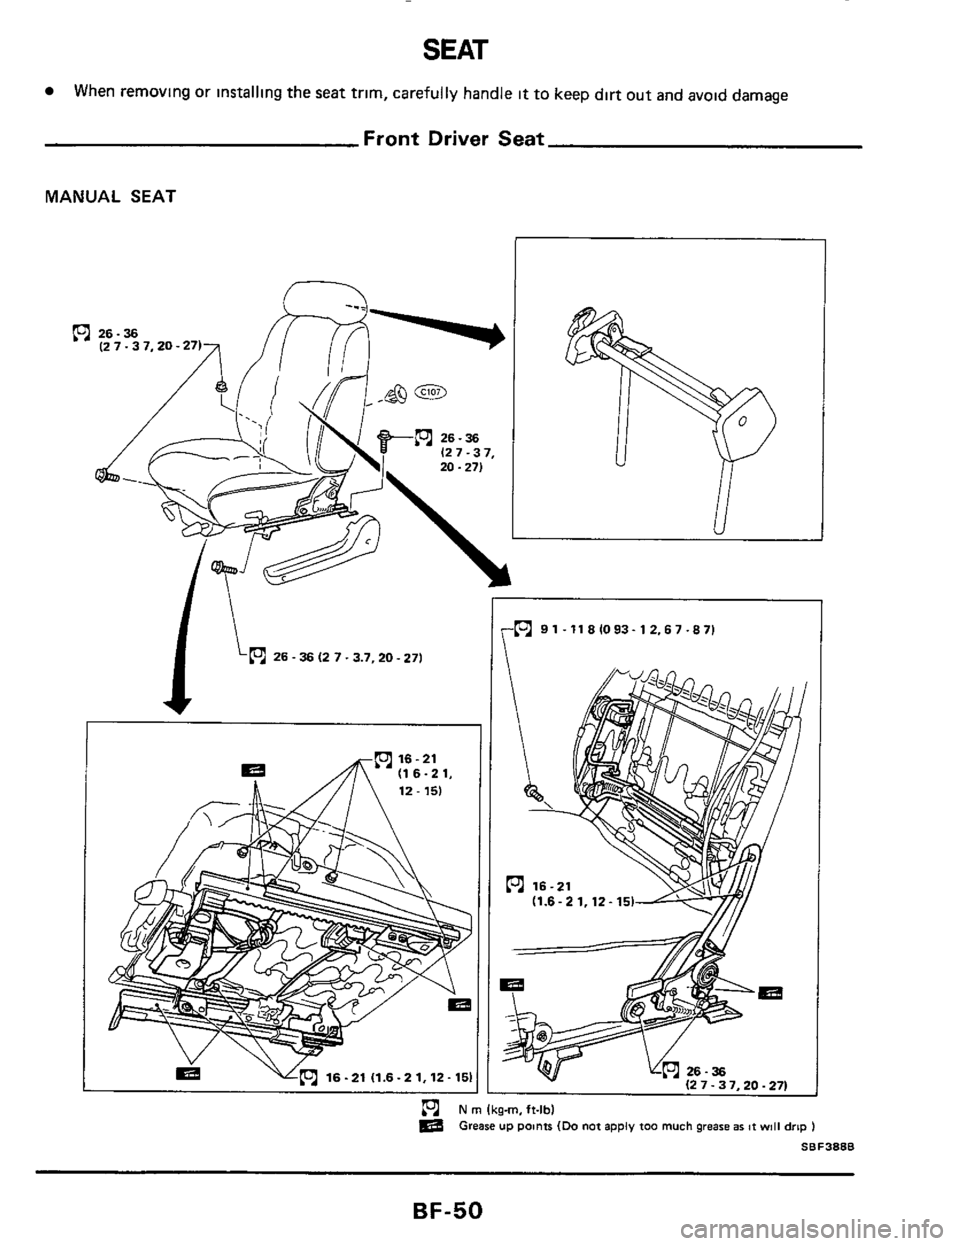 NISSAN 300ZX 1984 Z31 Body Service Manual SEAT 
When removing  or installing the seat trim,  carefully  handle it to keep dirt out and  avoid  damage 
Front  Driver  Seat 
MANUAL  SEAT 
26-36 (2 7.3 7,20  -27) 
26 - 36 (2 7.3.7,20 - 271 
P 
v